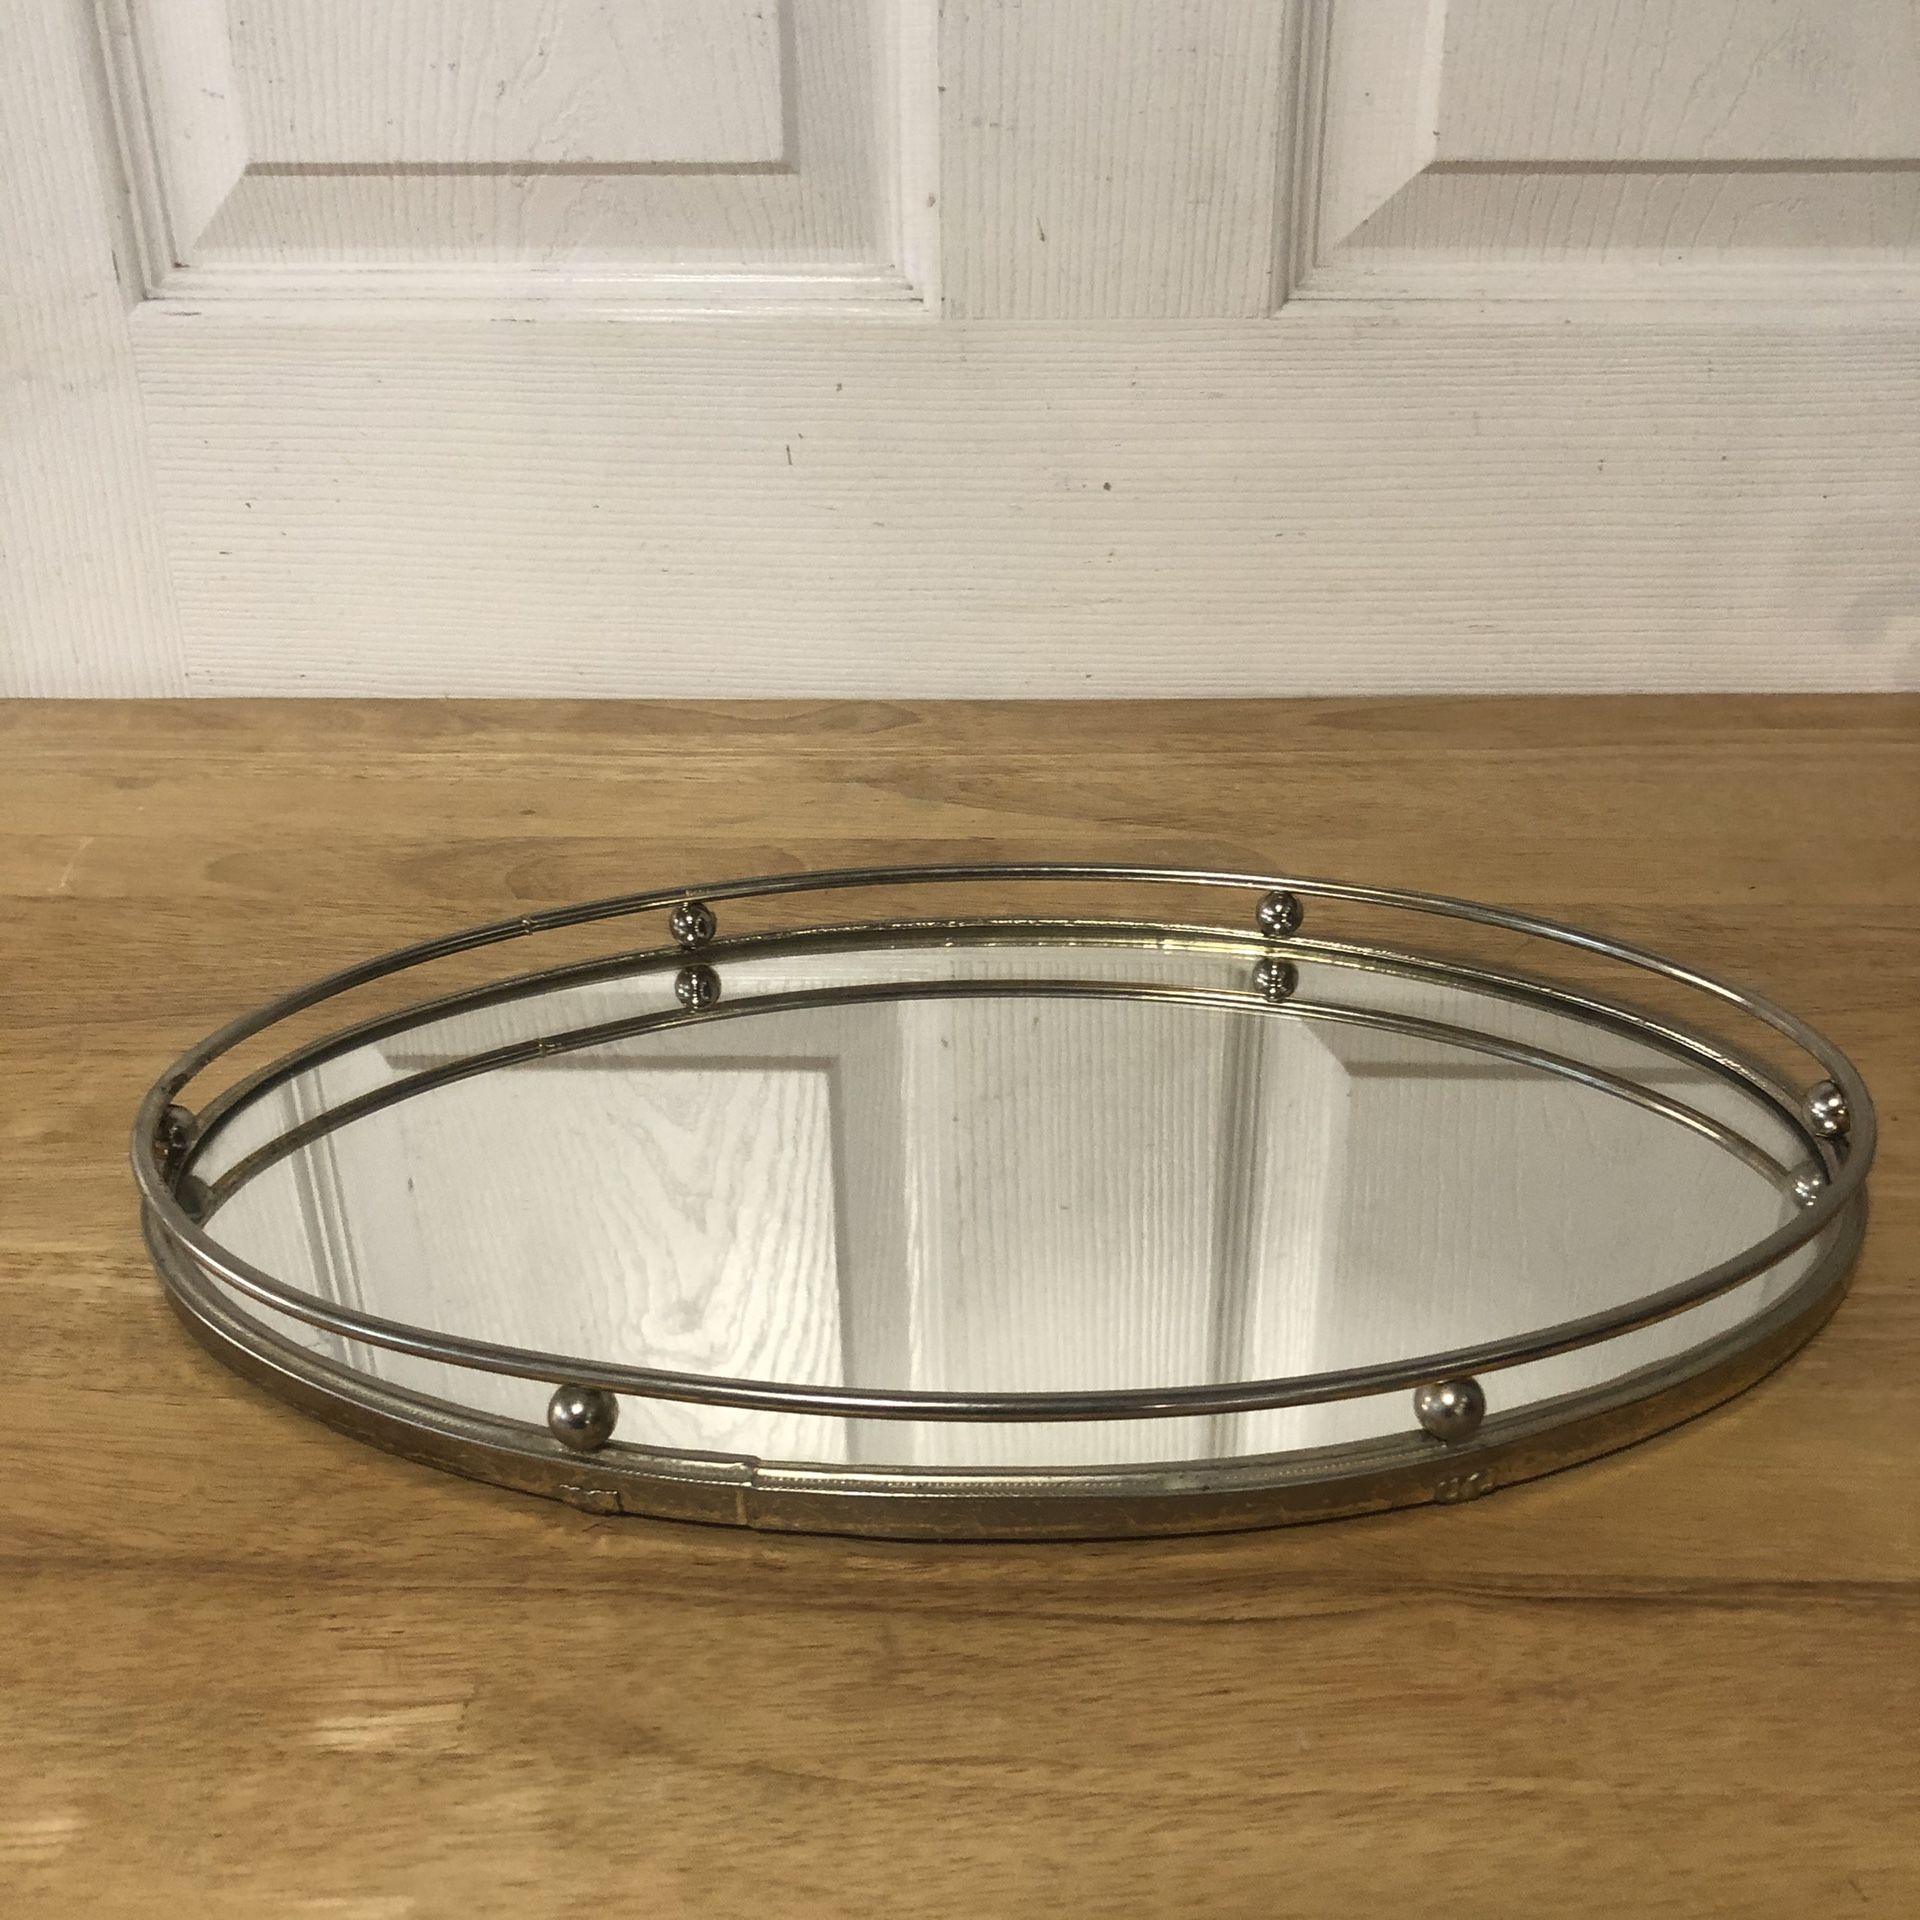 Vintage Mirror Vanity Perfume / Makeup Tray. Excellent Condition. Firm.